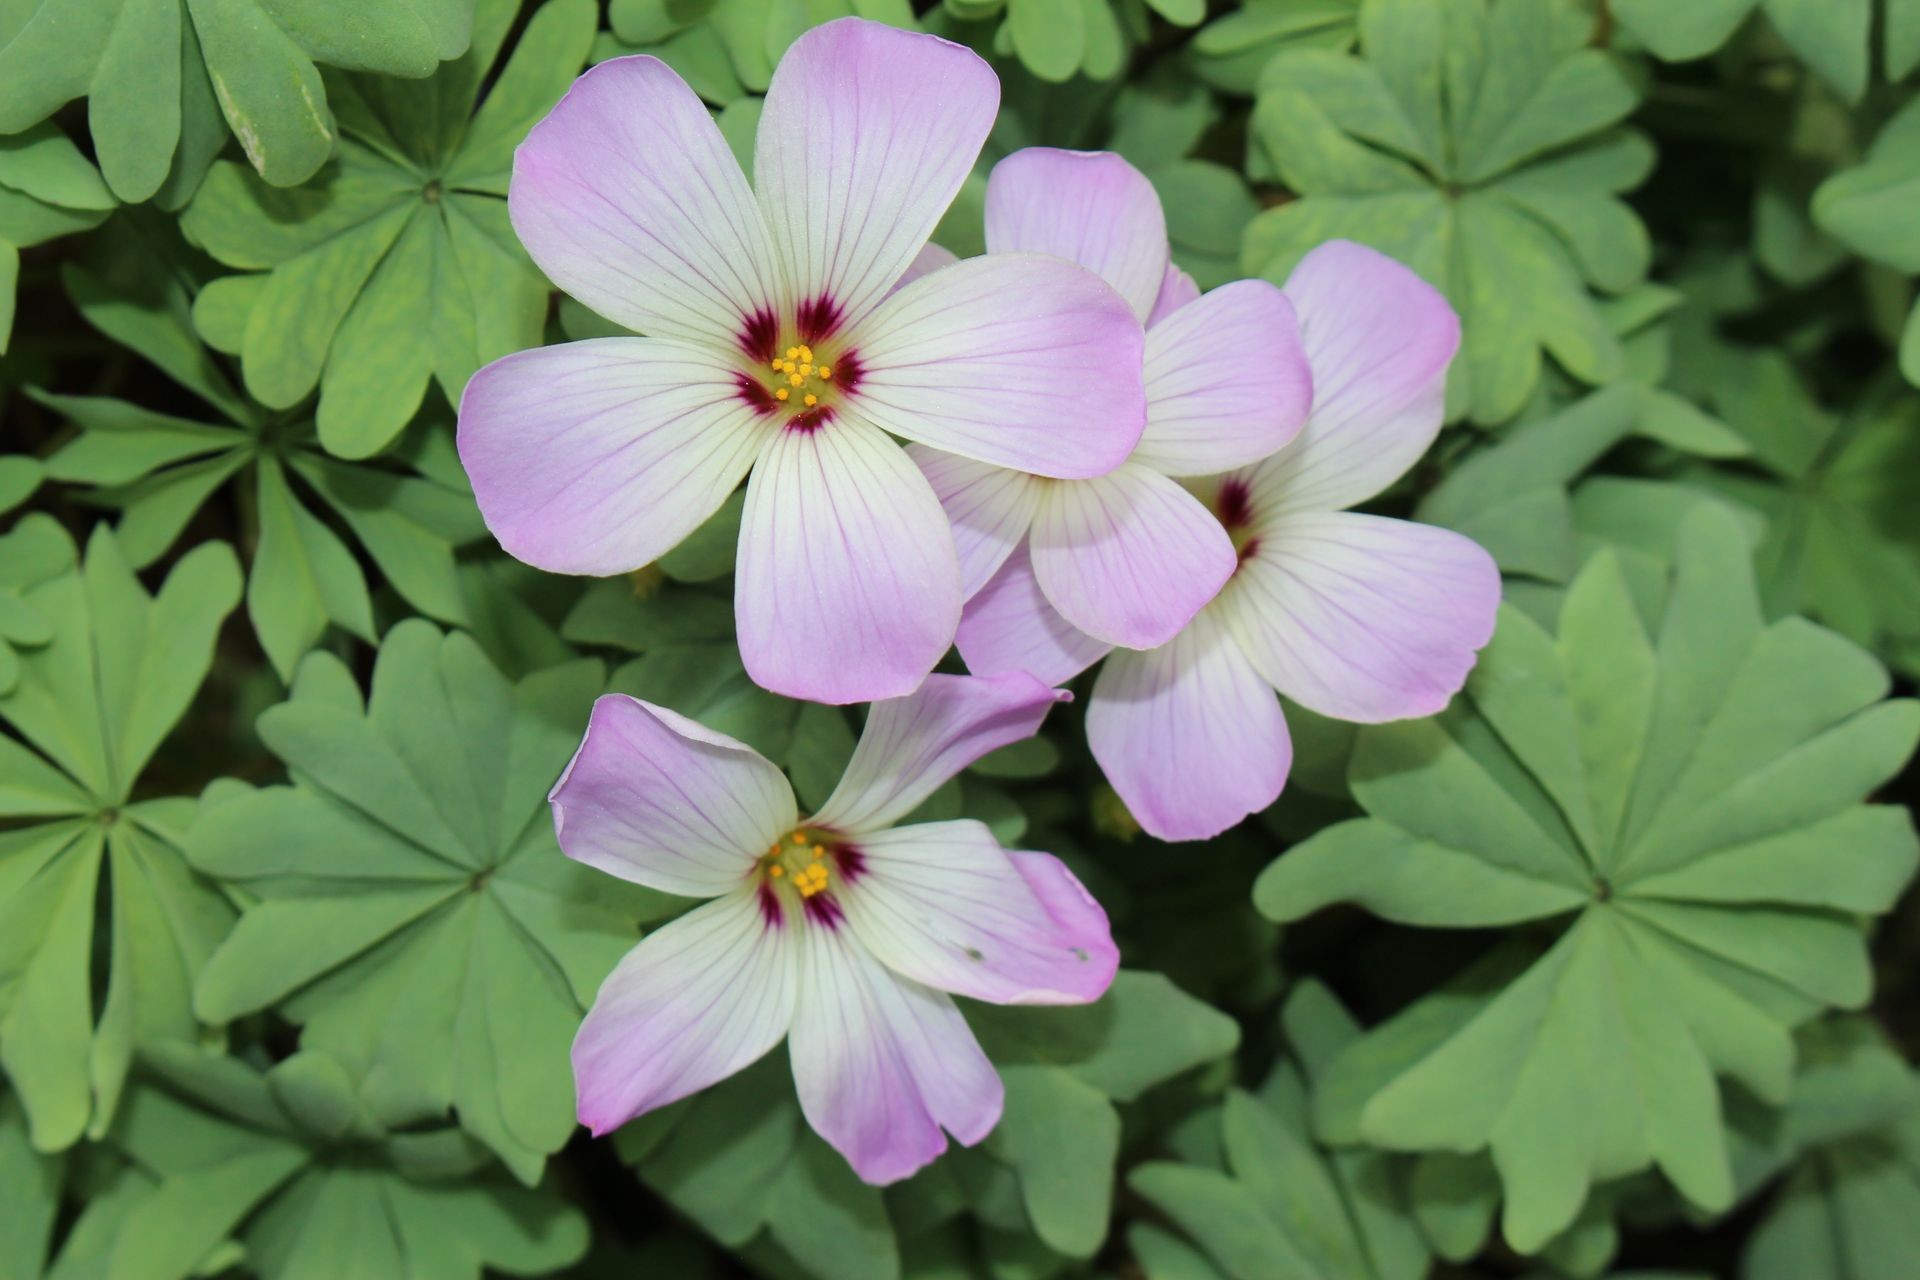  "Silver Shamrock" flowers (or Chilean Oxalis, Pink Carpet Oxalis, Pink Buttercups, Pink Sauerklee) in St. Gallen, Switzerland. Oxalis Adenophylla is native to Chile and West Argentina.